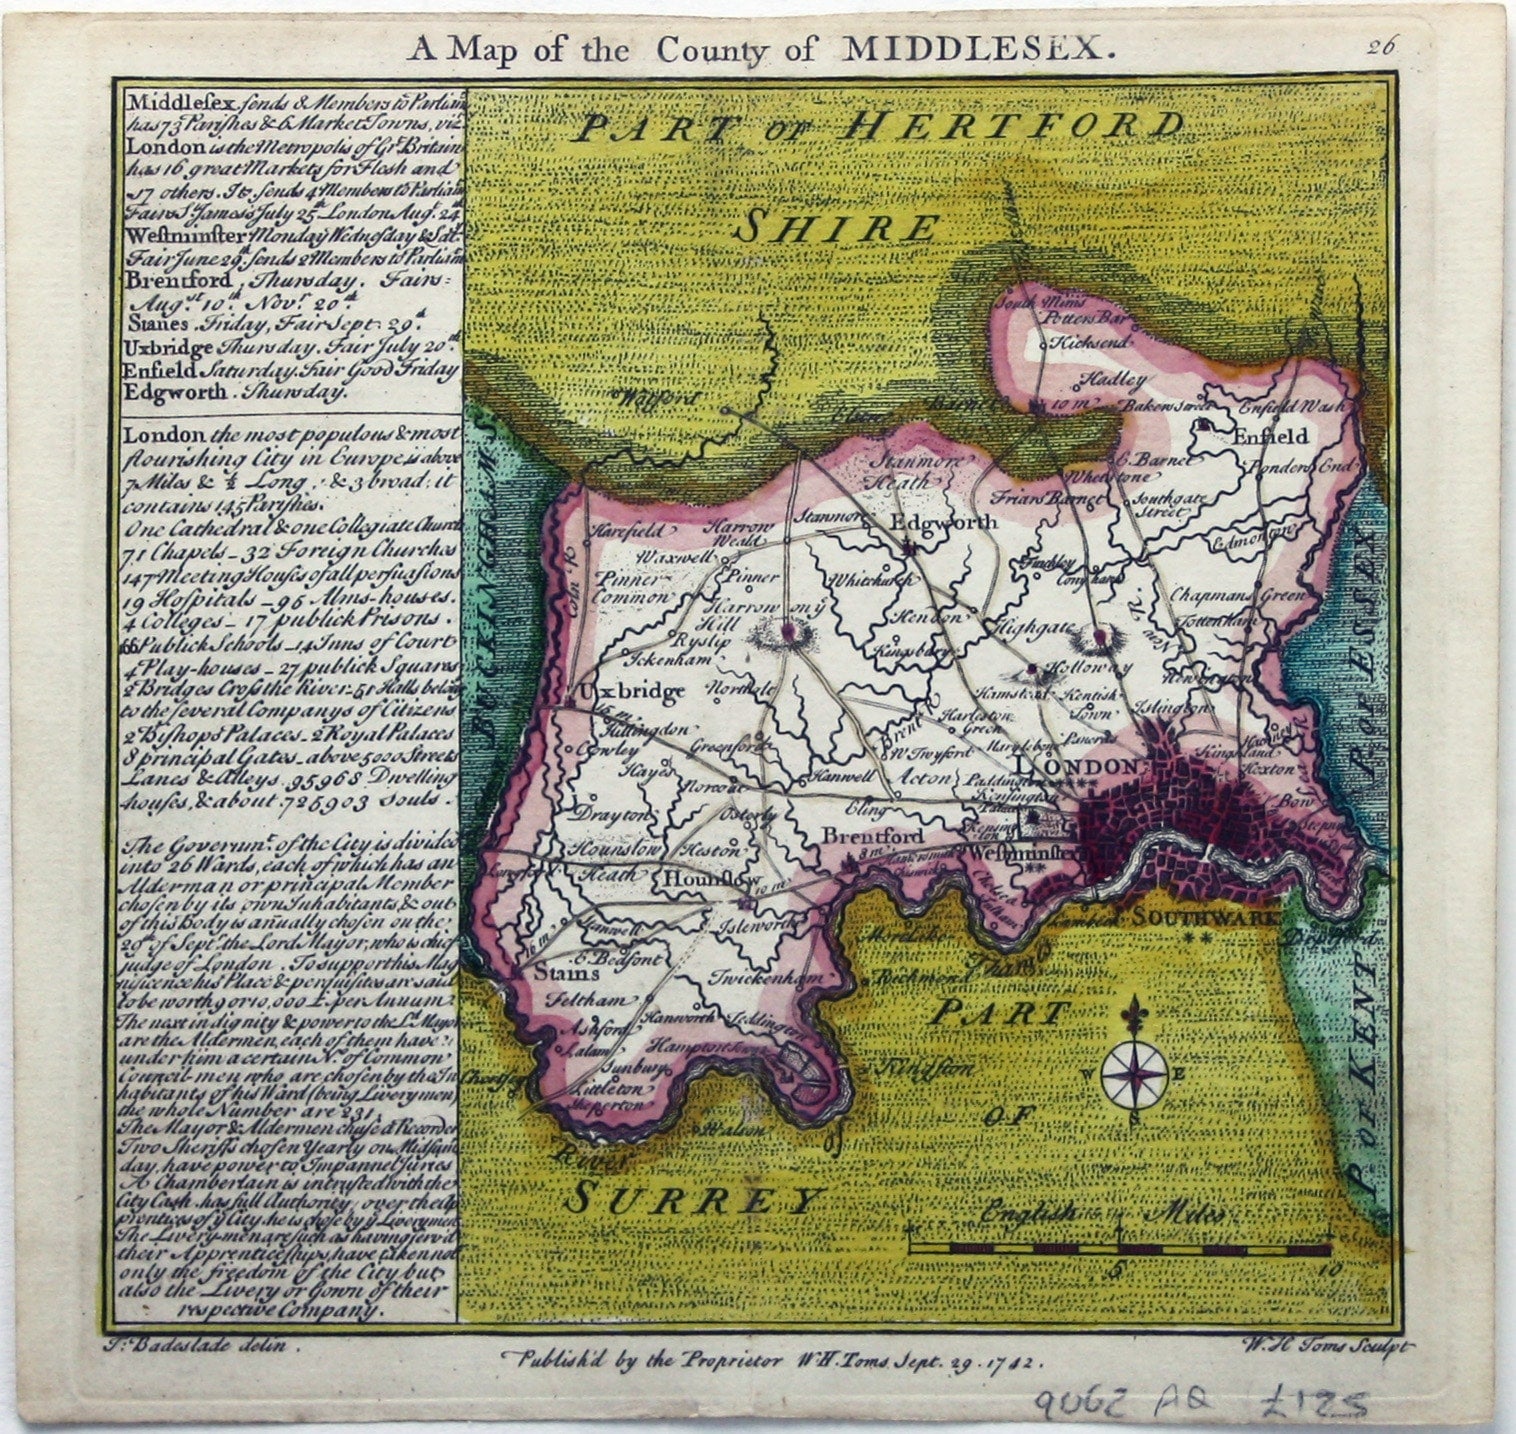 Badeslade & Toms’ Map of Middlesex